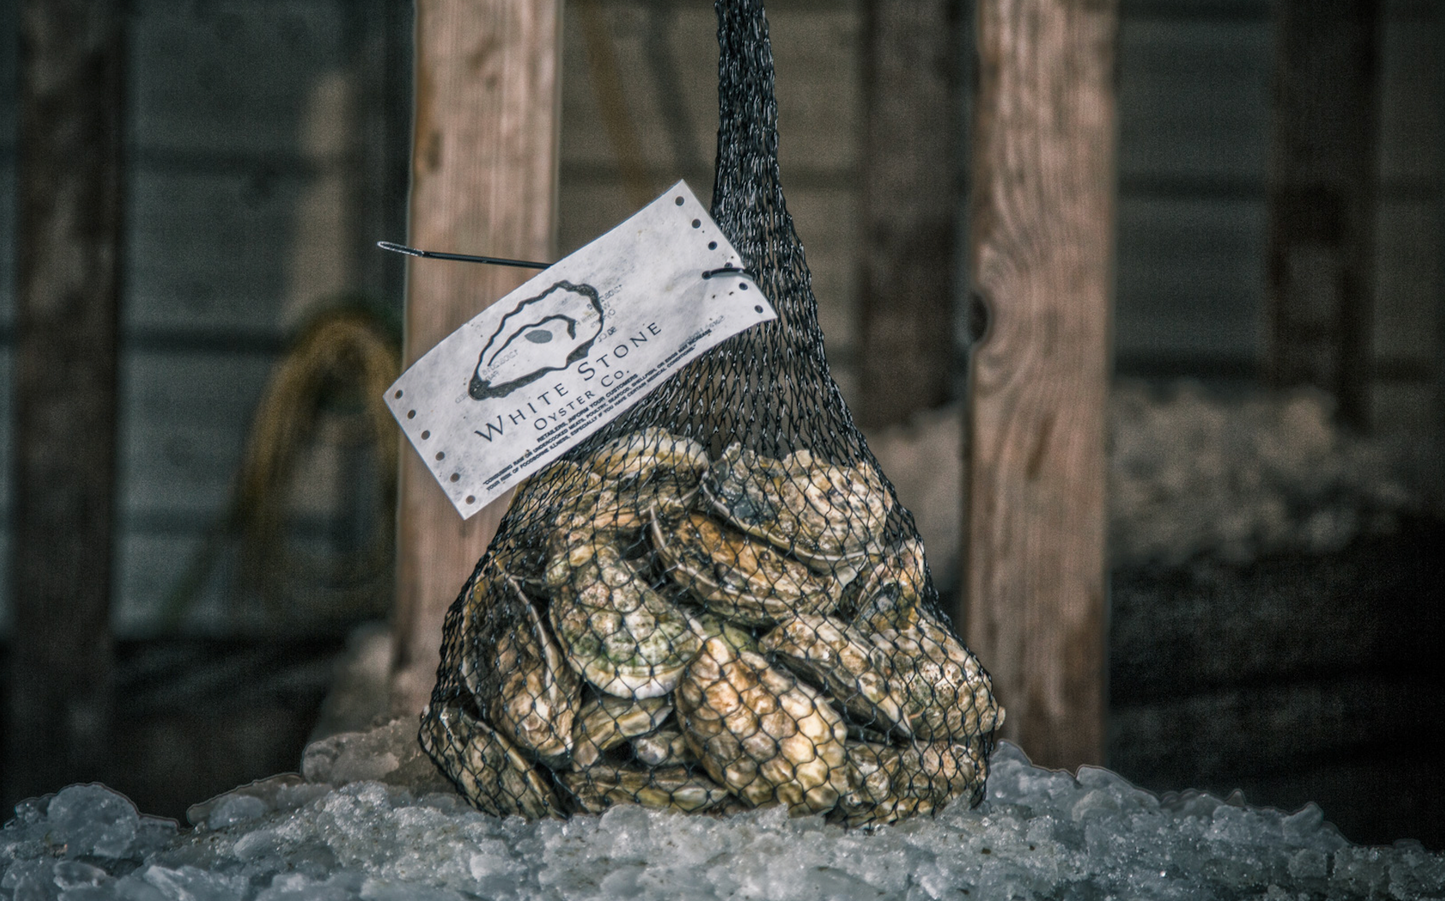 Guide To Buying Raw Oysters - What To Look For & What To Avoid